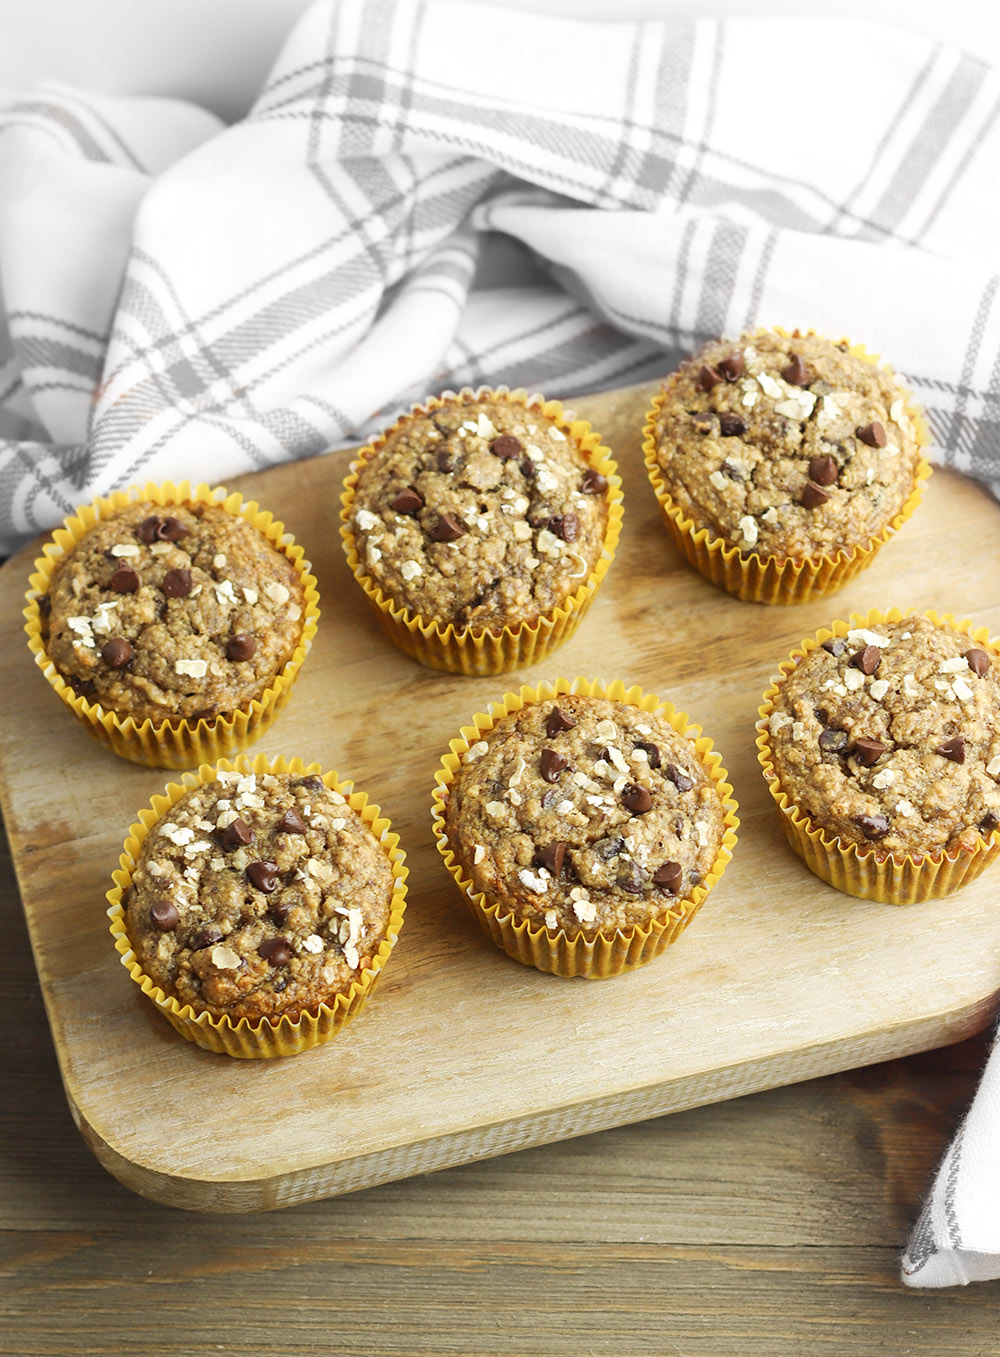 Peanut Butter, Oatmeal, and Banana Muffins